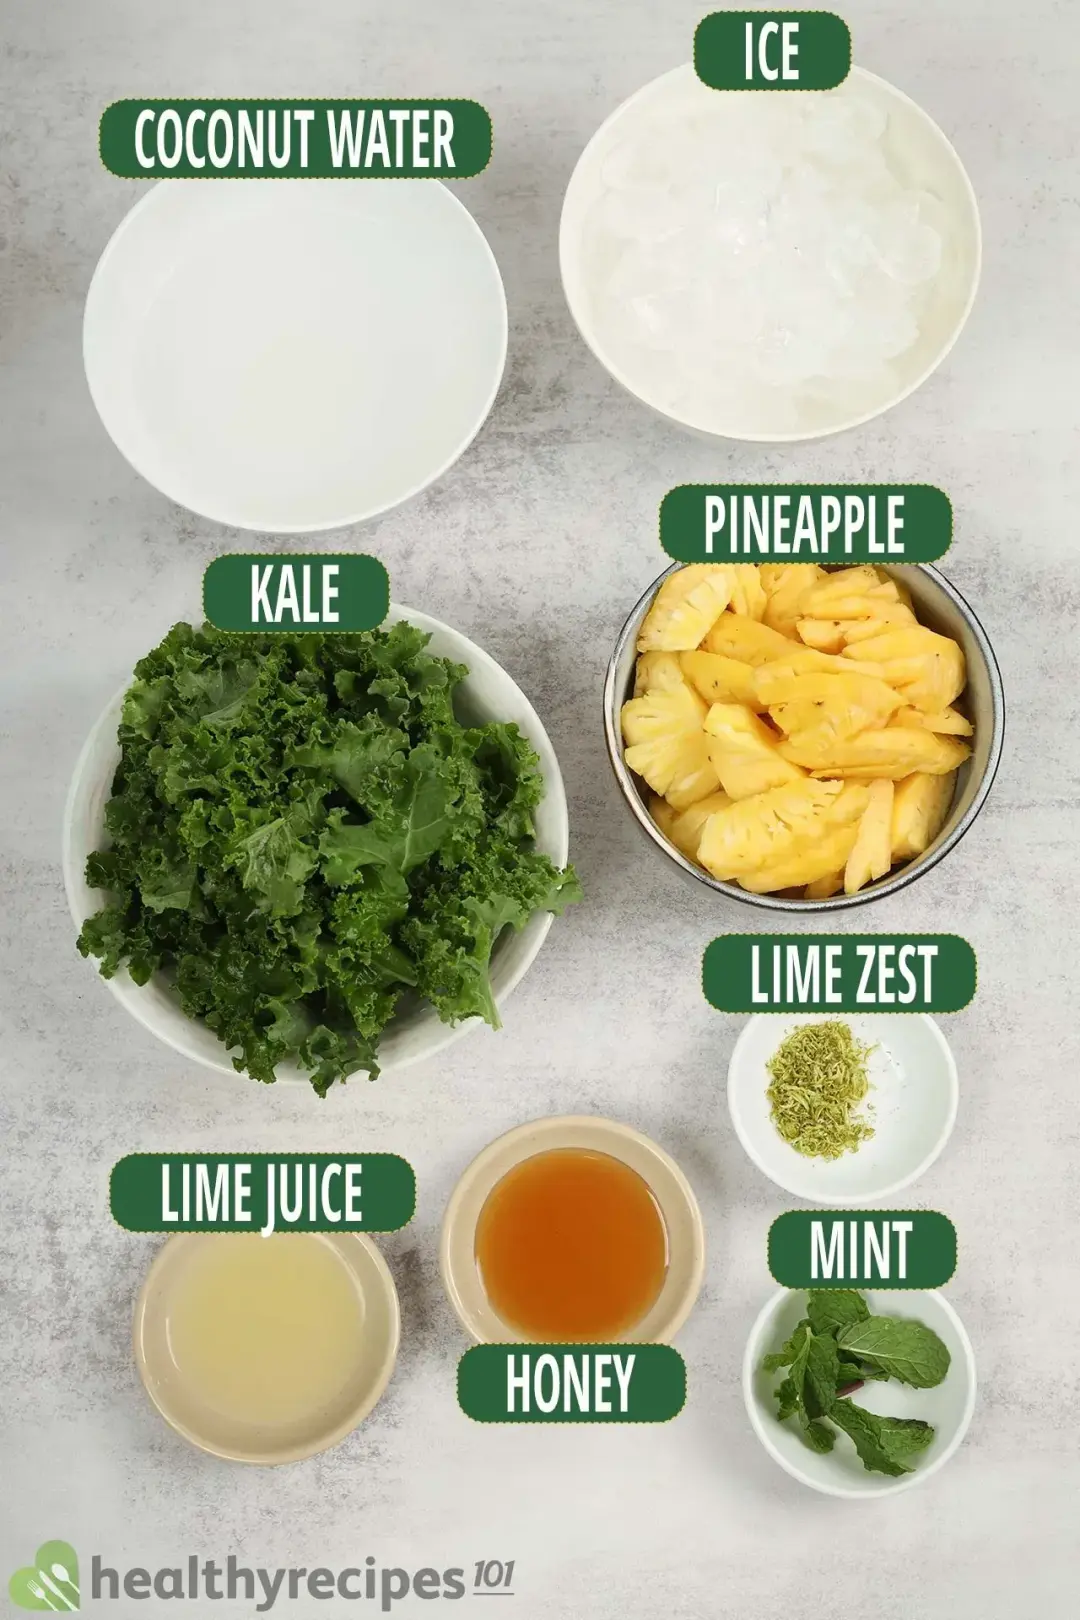 Ingredients for this smoothie: kale leaves, sliced pineapples, coconut water, lime zest, lime juice, honey, mint leaves, and ice cubes.